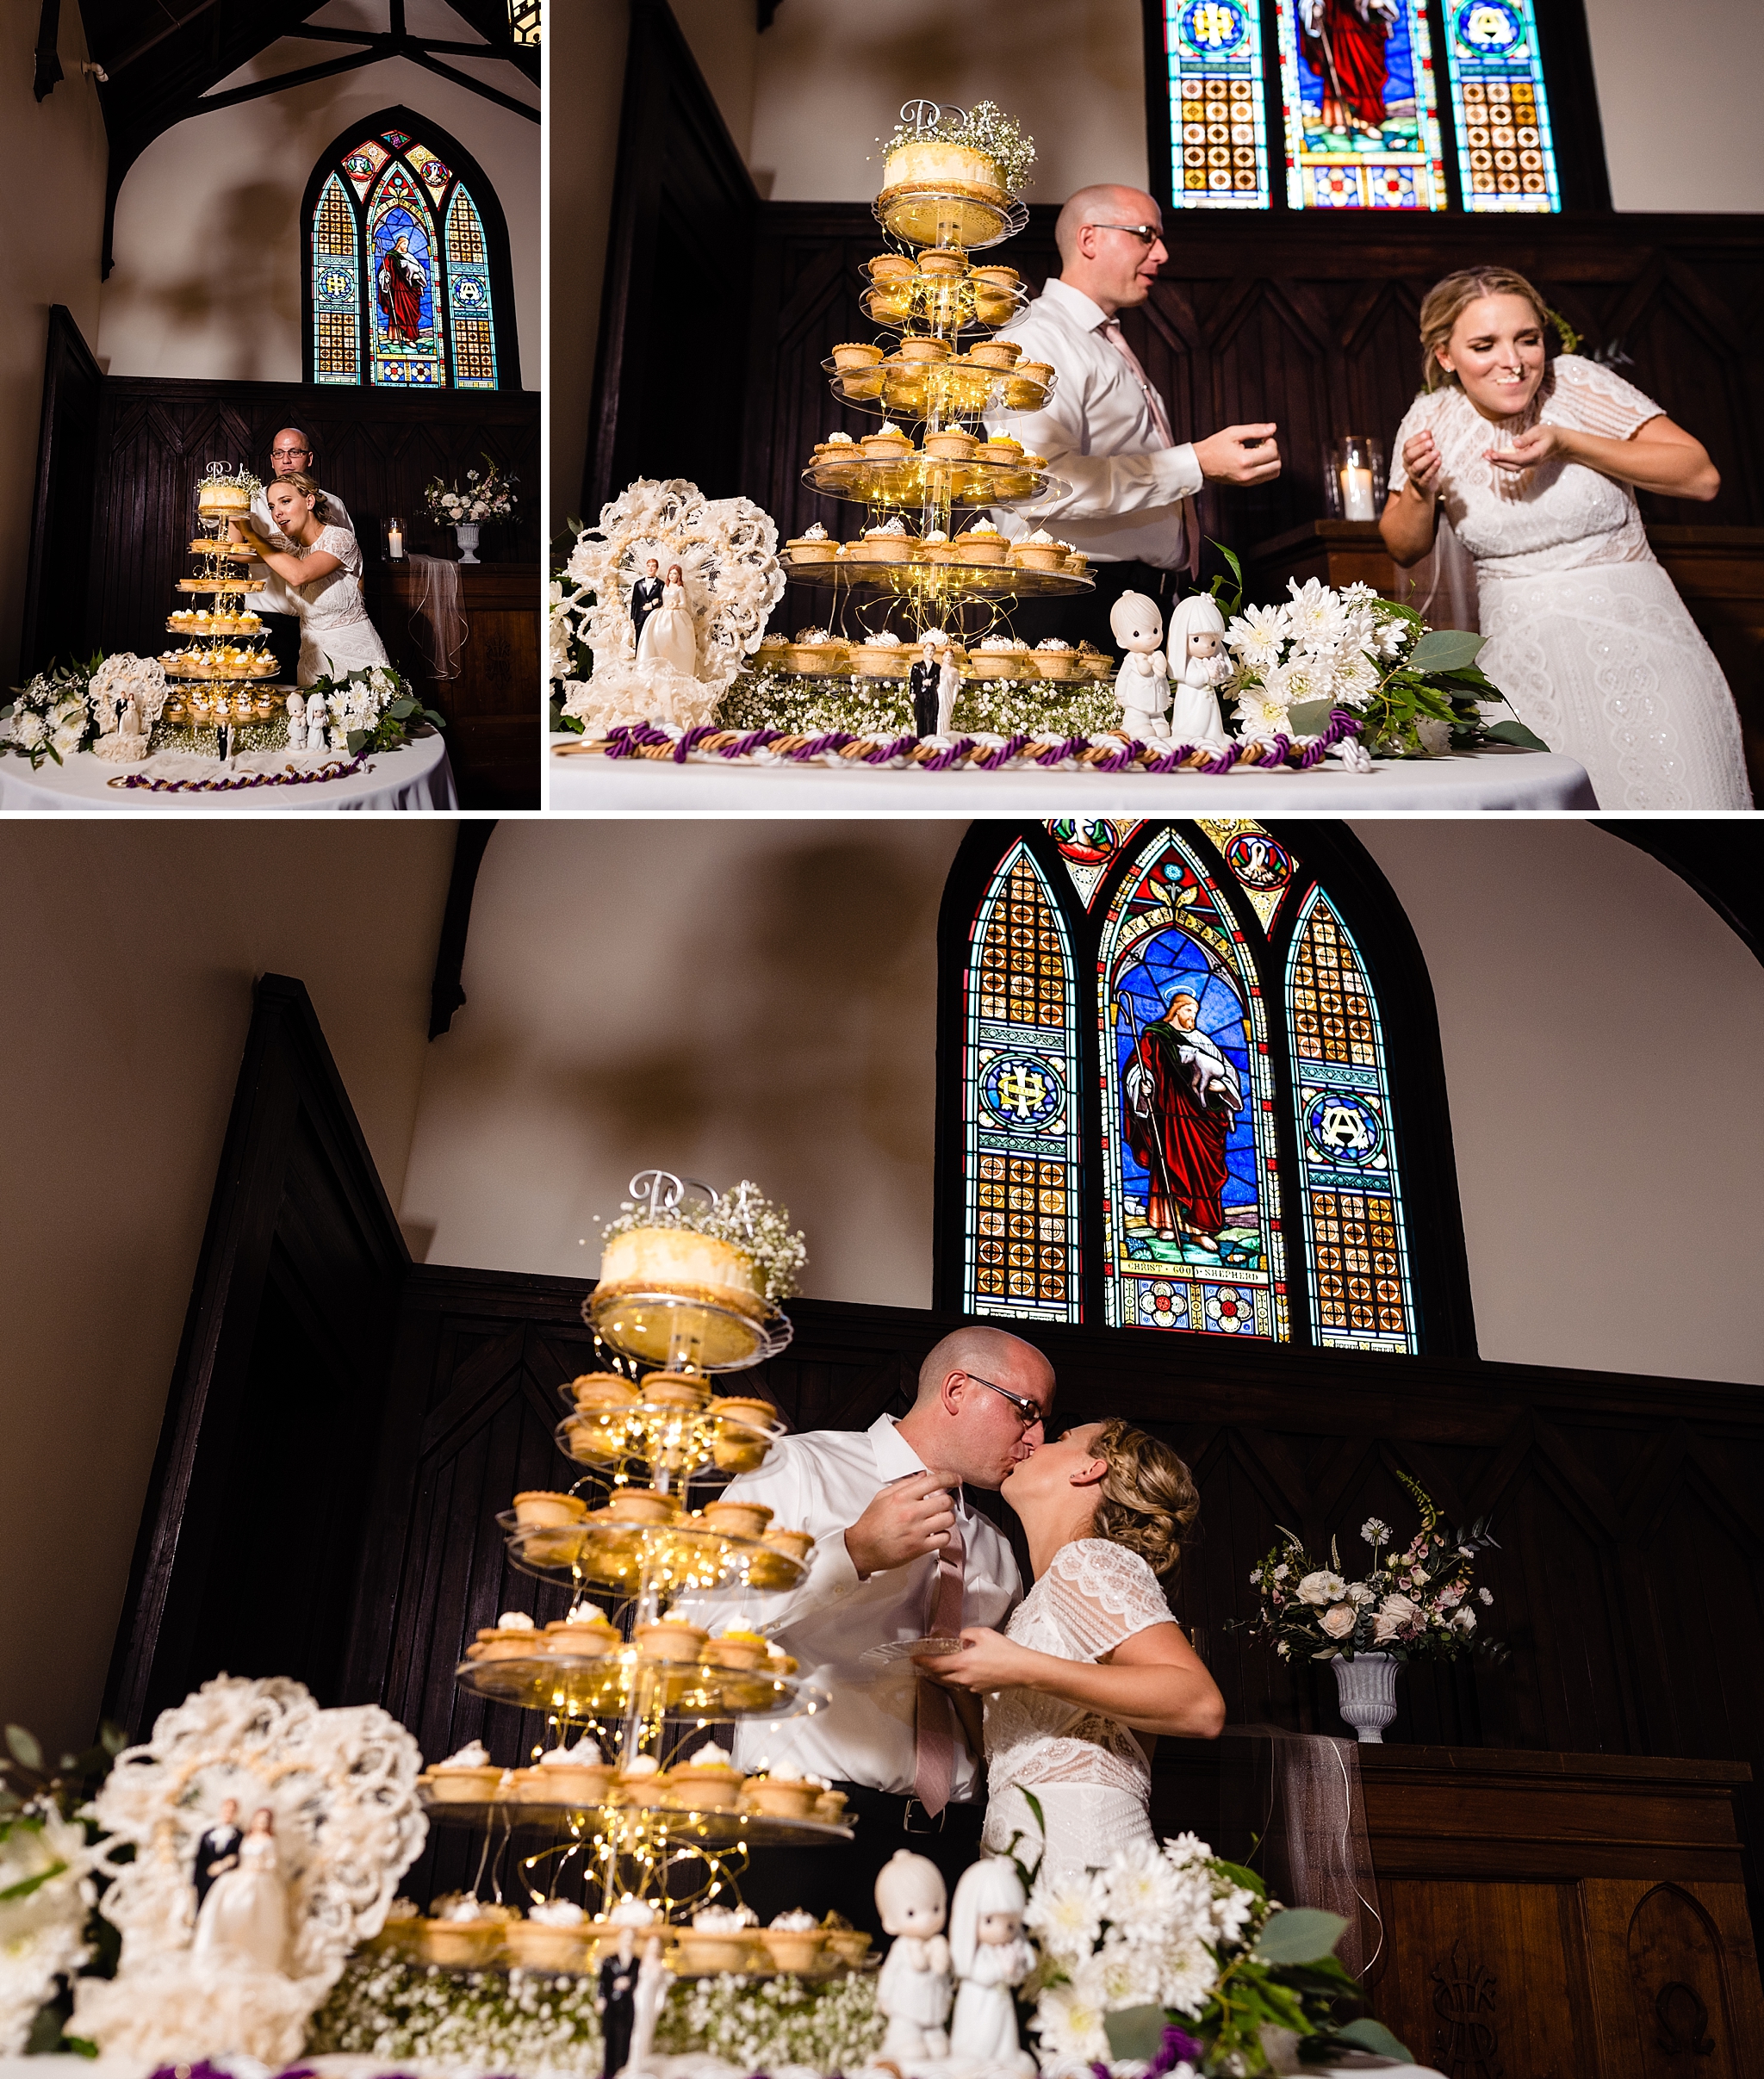 Groom smashes cupcake on bride's face during cake cutting All Saints Chapel from Raleigh wedding photographers